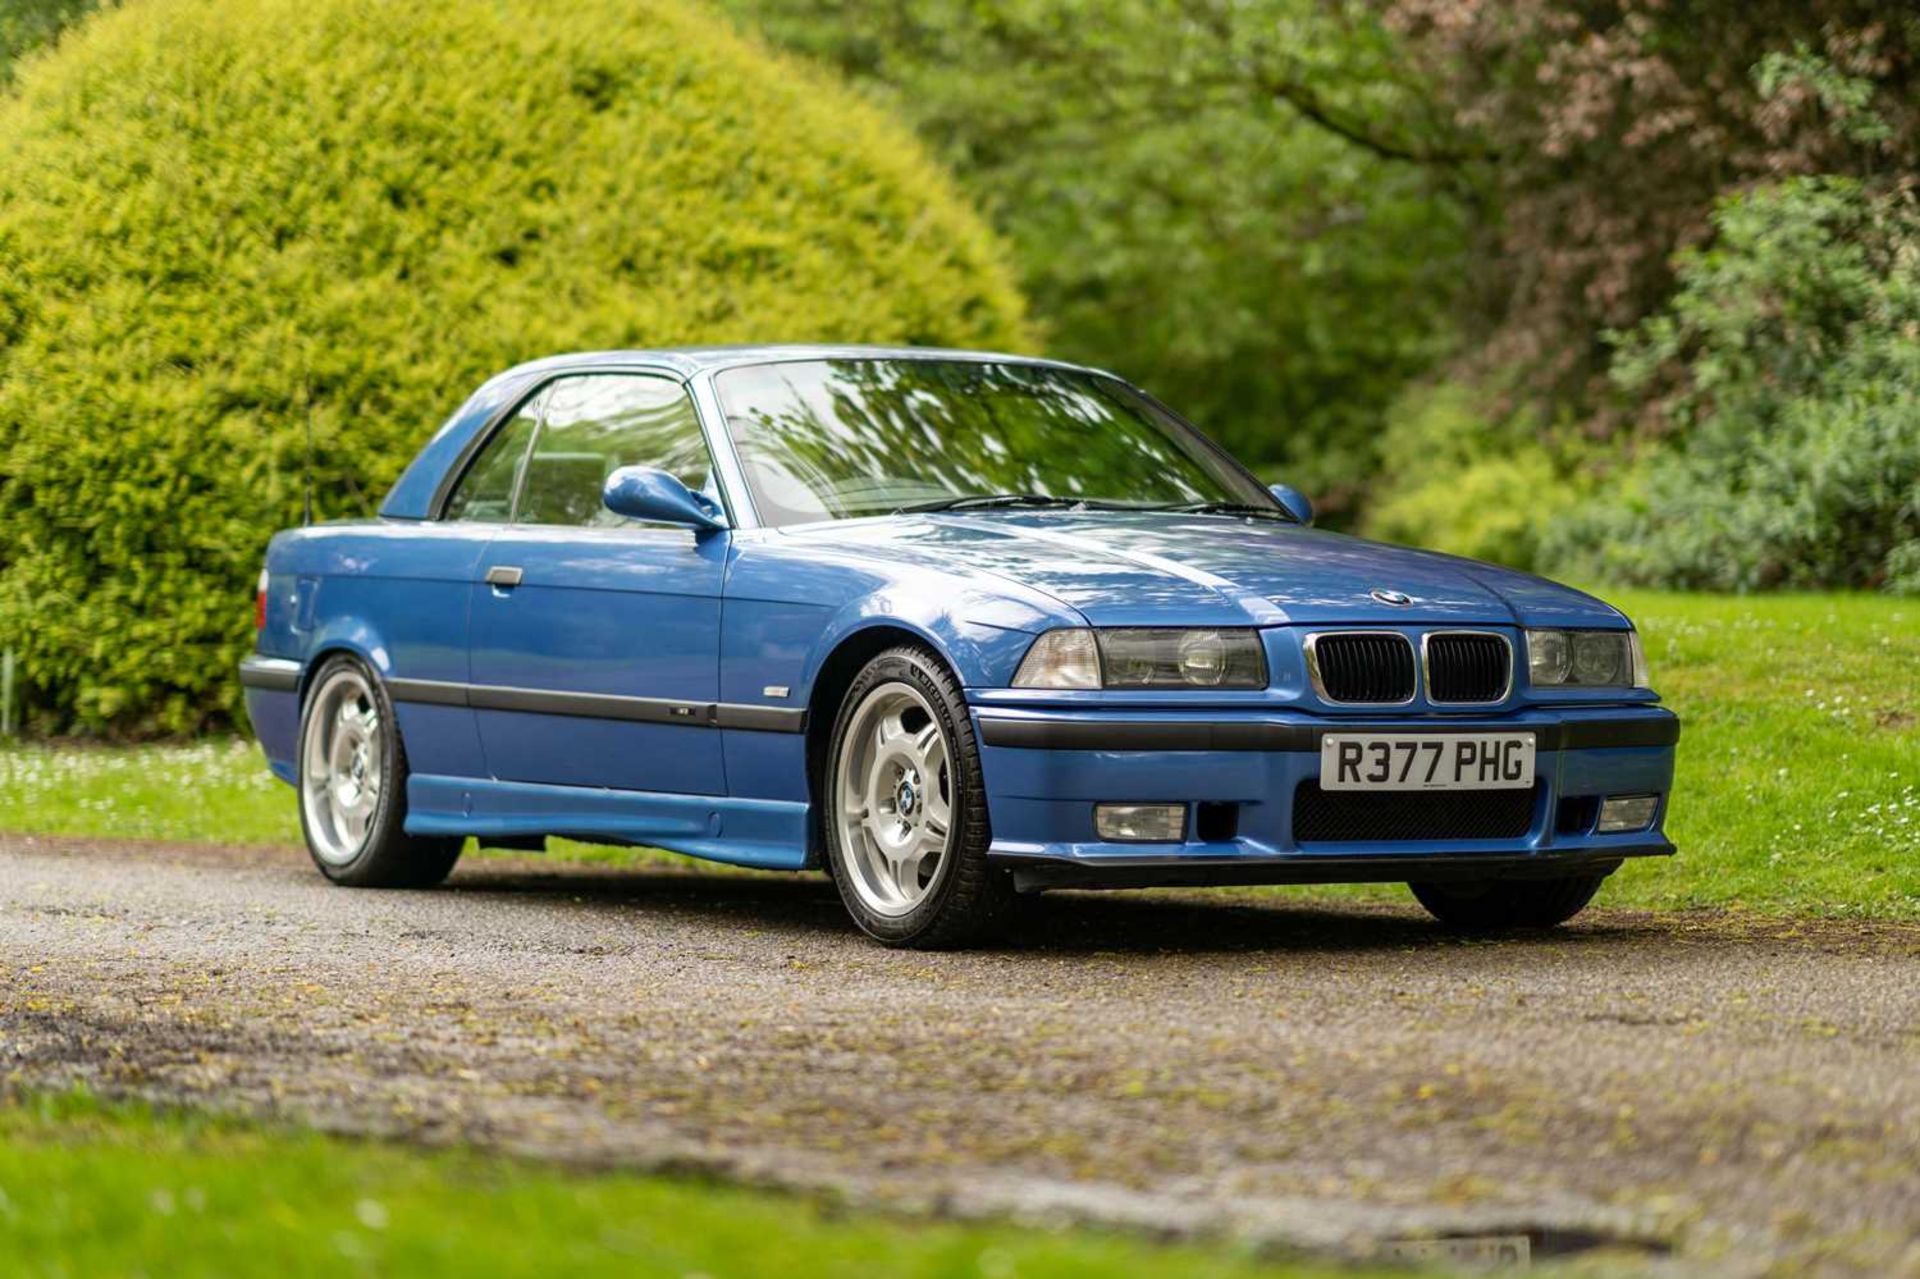 1998 BMW M3 Evolution Convertible Only 54,000 miles and full service history